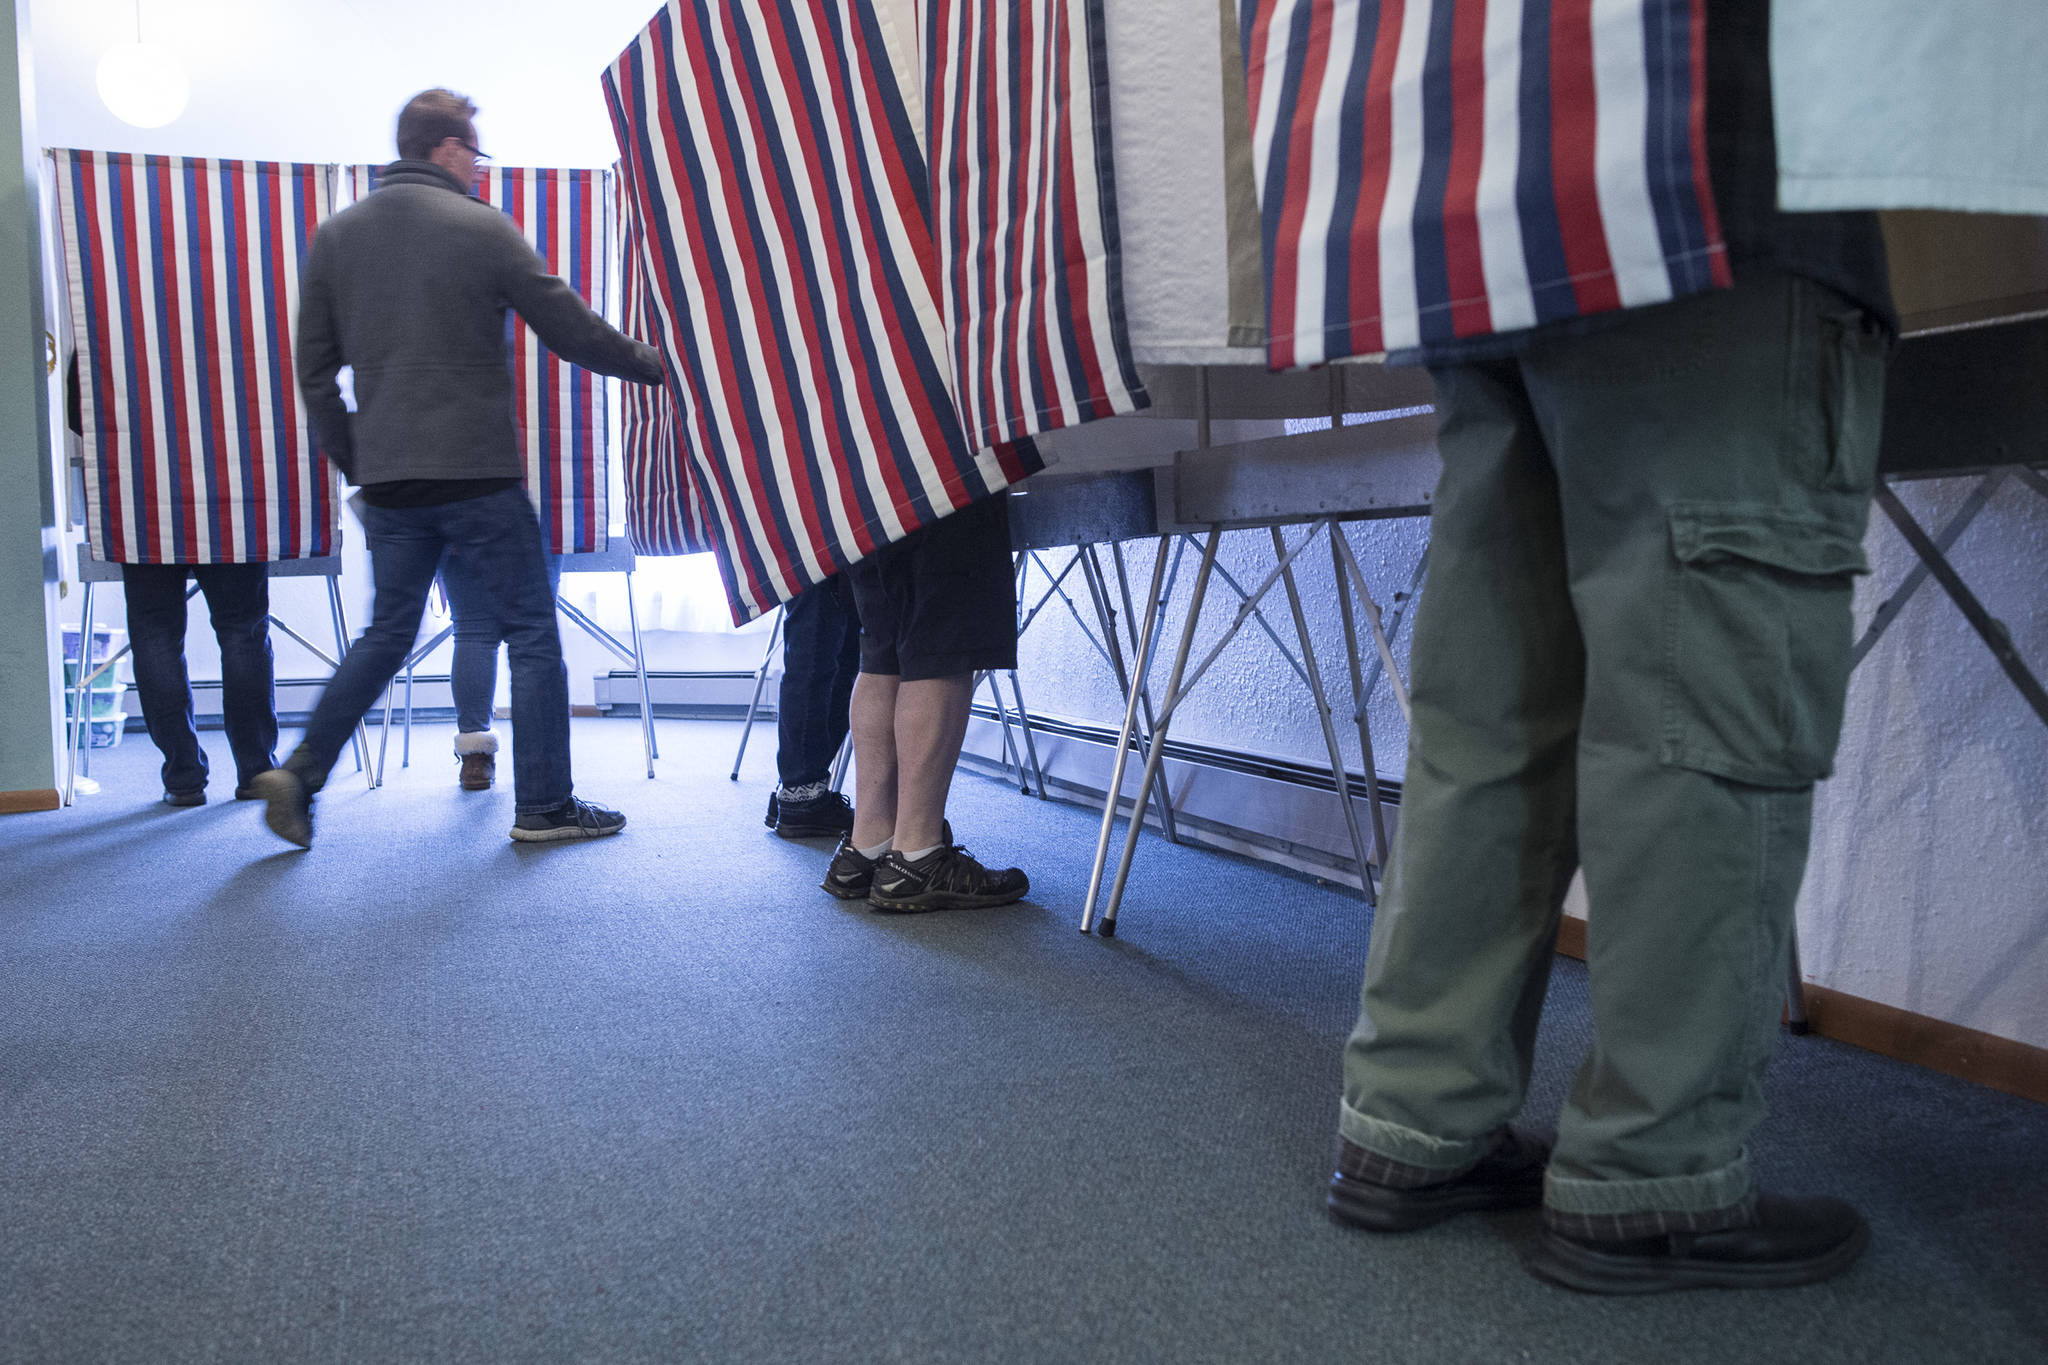 Voters fill the voting booths at Glacier Valley Baptist Church on Election Day, Tuesday, Nov. 6, 2018. (Michael Penn | Juneau Empire)